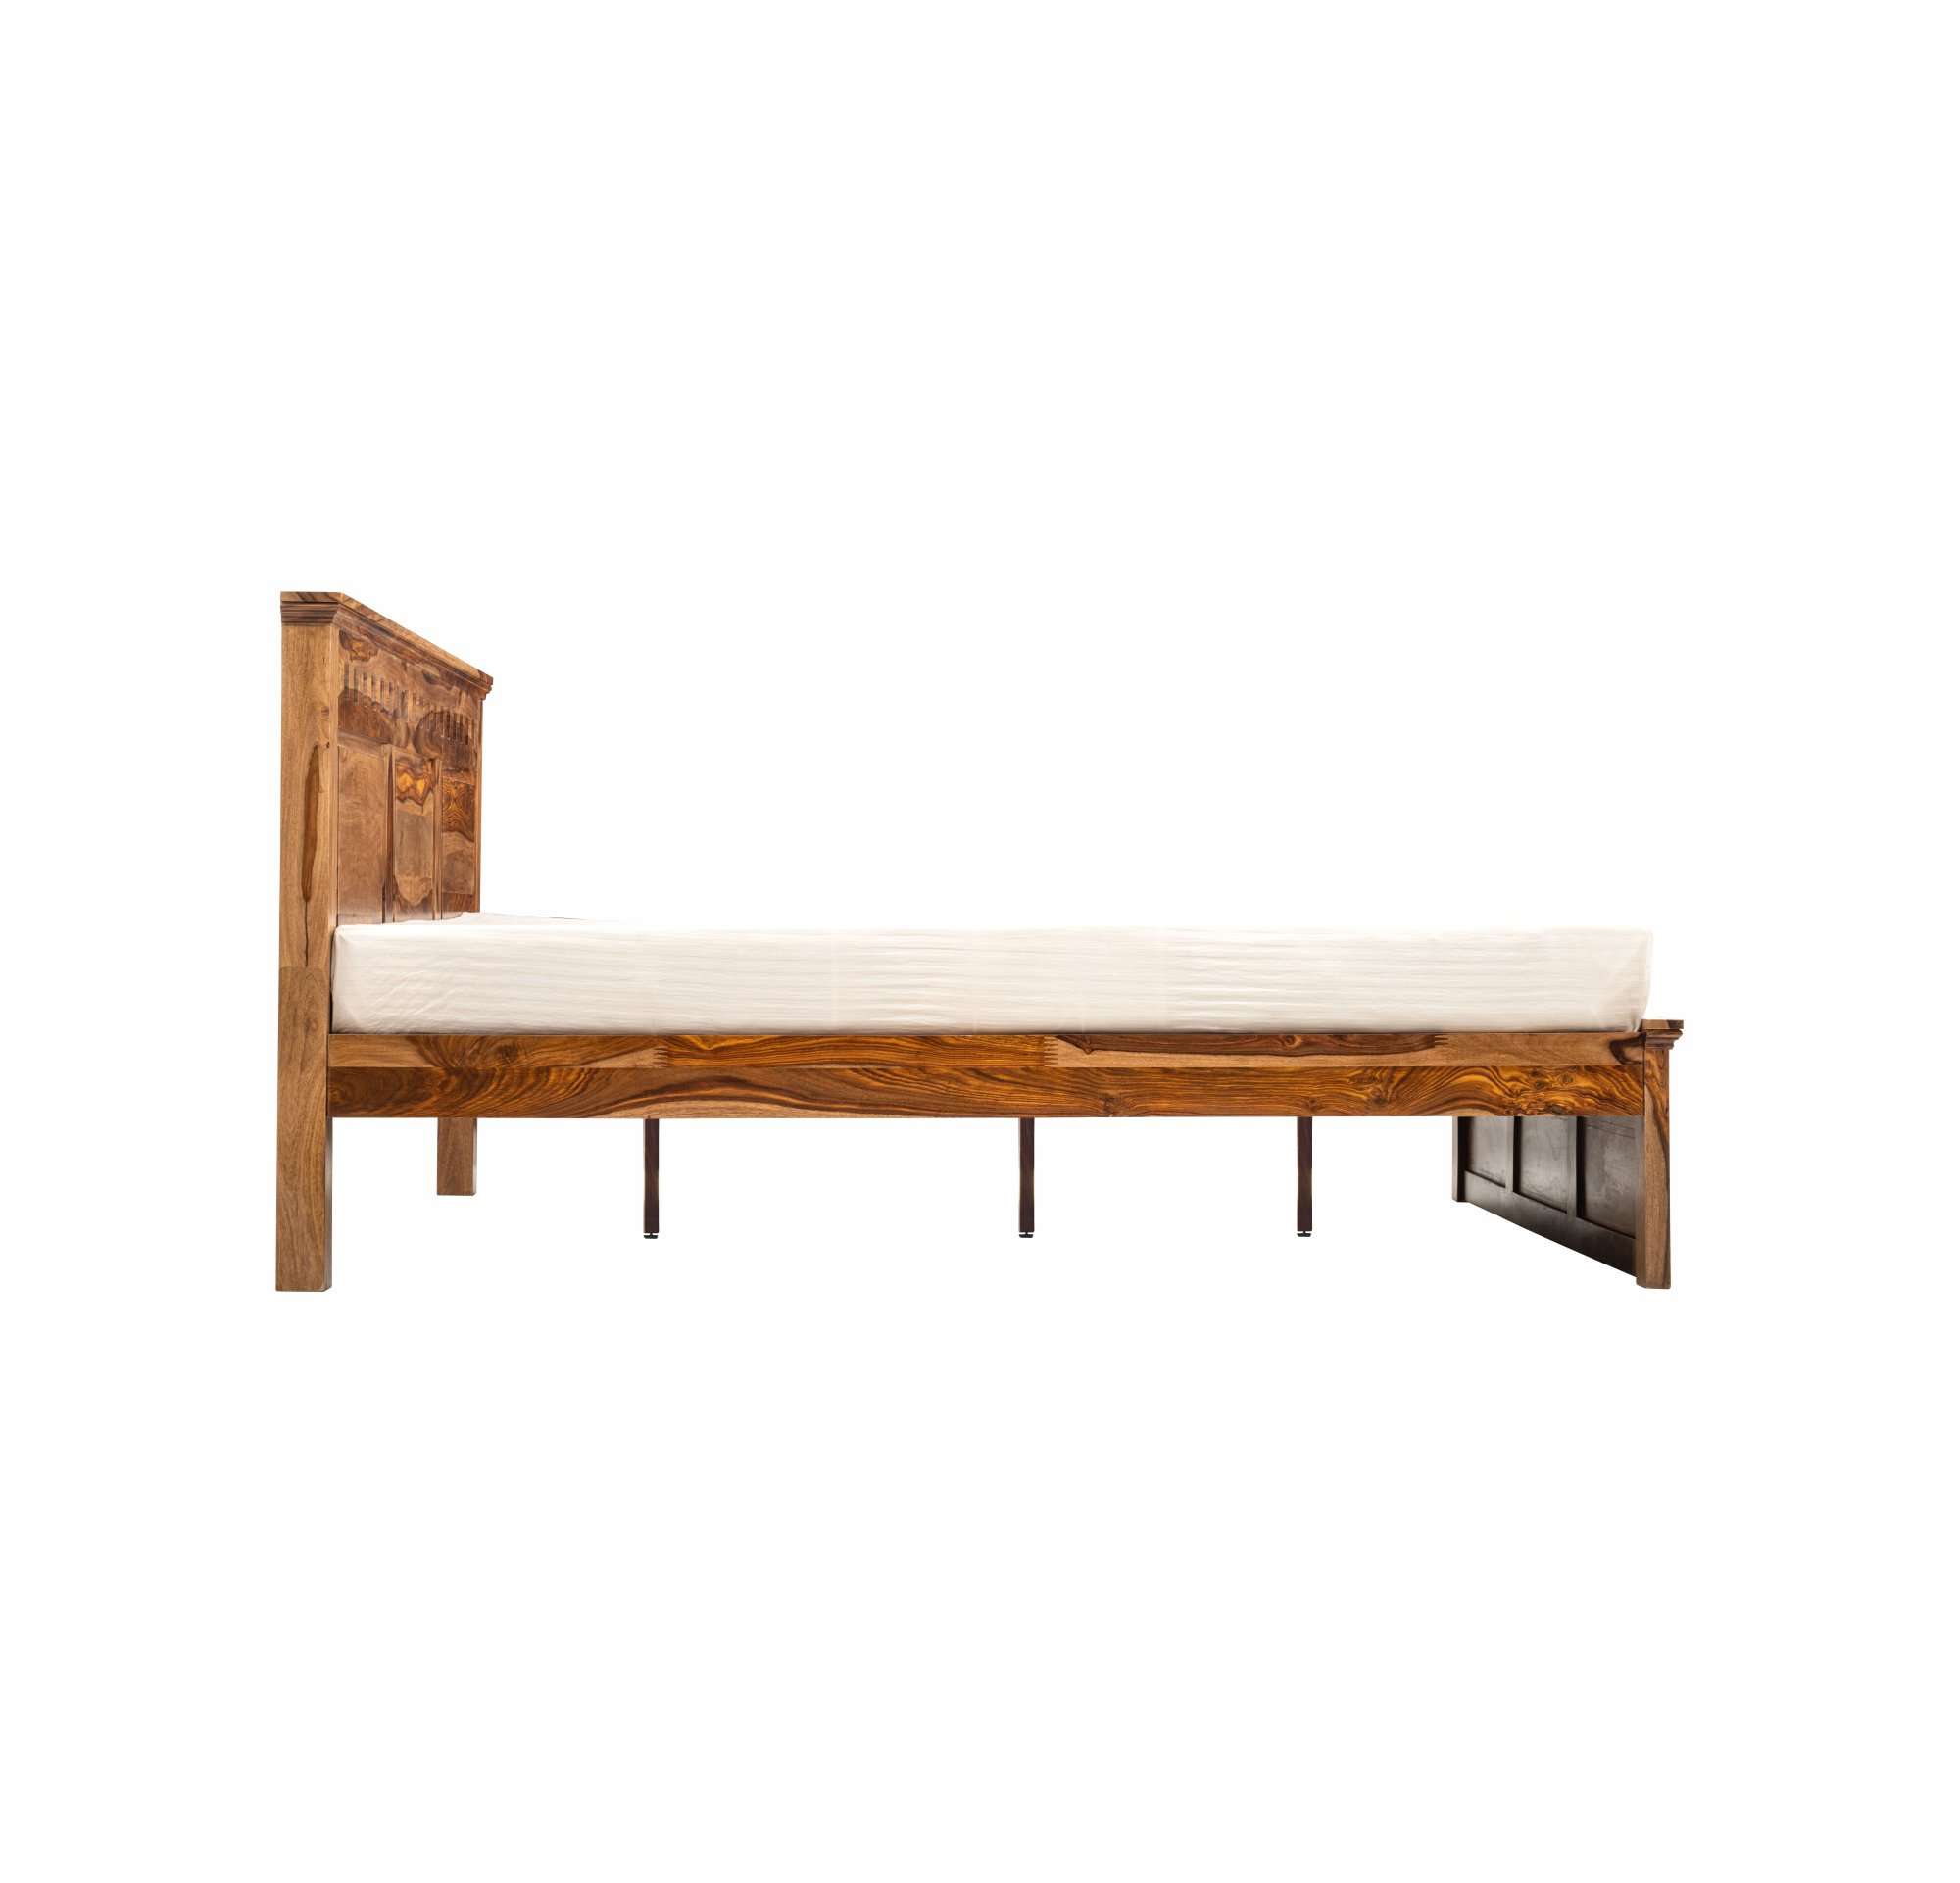 LSCWBWA003-Bed Warsaw Queen Size BD220105-Honey Natural